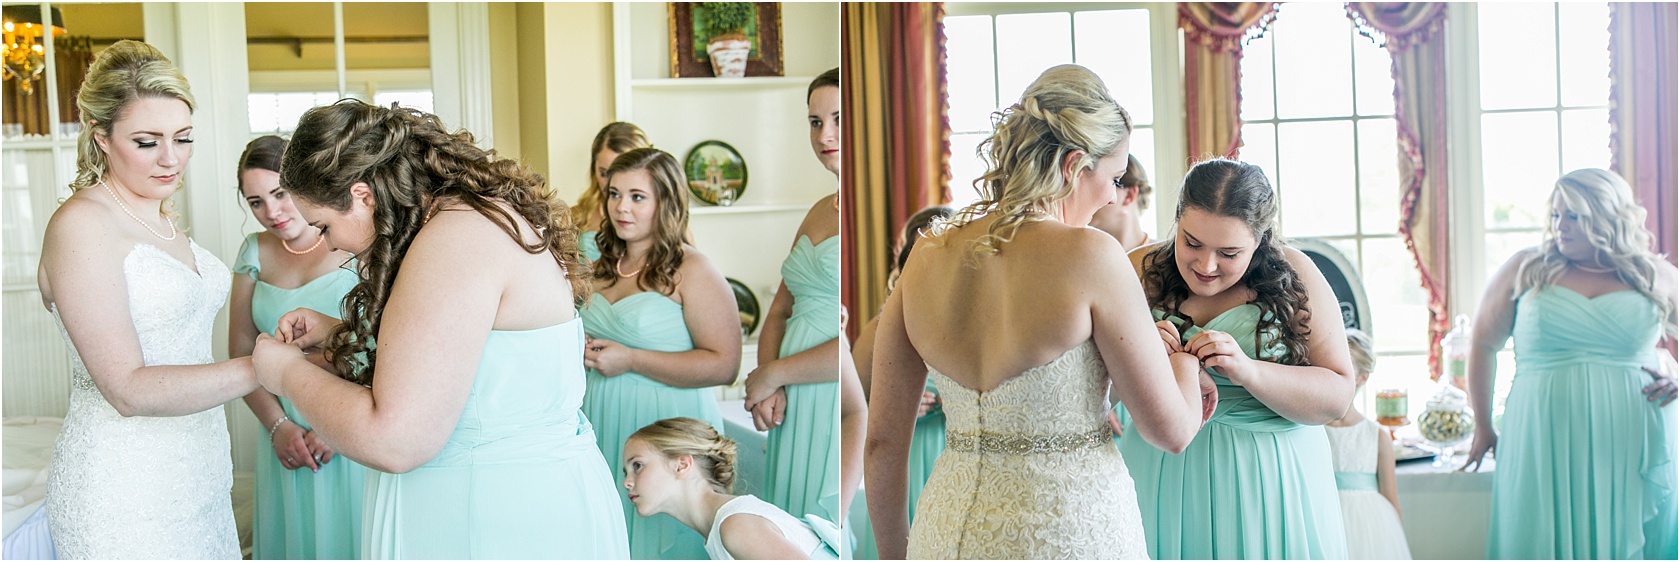 Hegwald Rolling Road Country Club Wedding Living Radiant Photography photos_0016.jpg